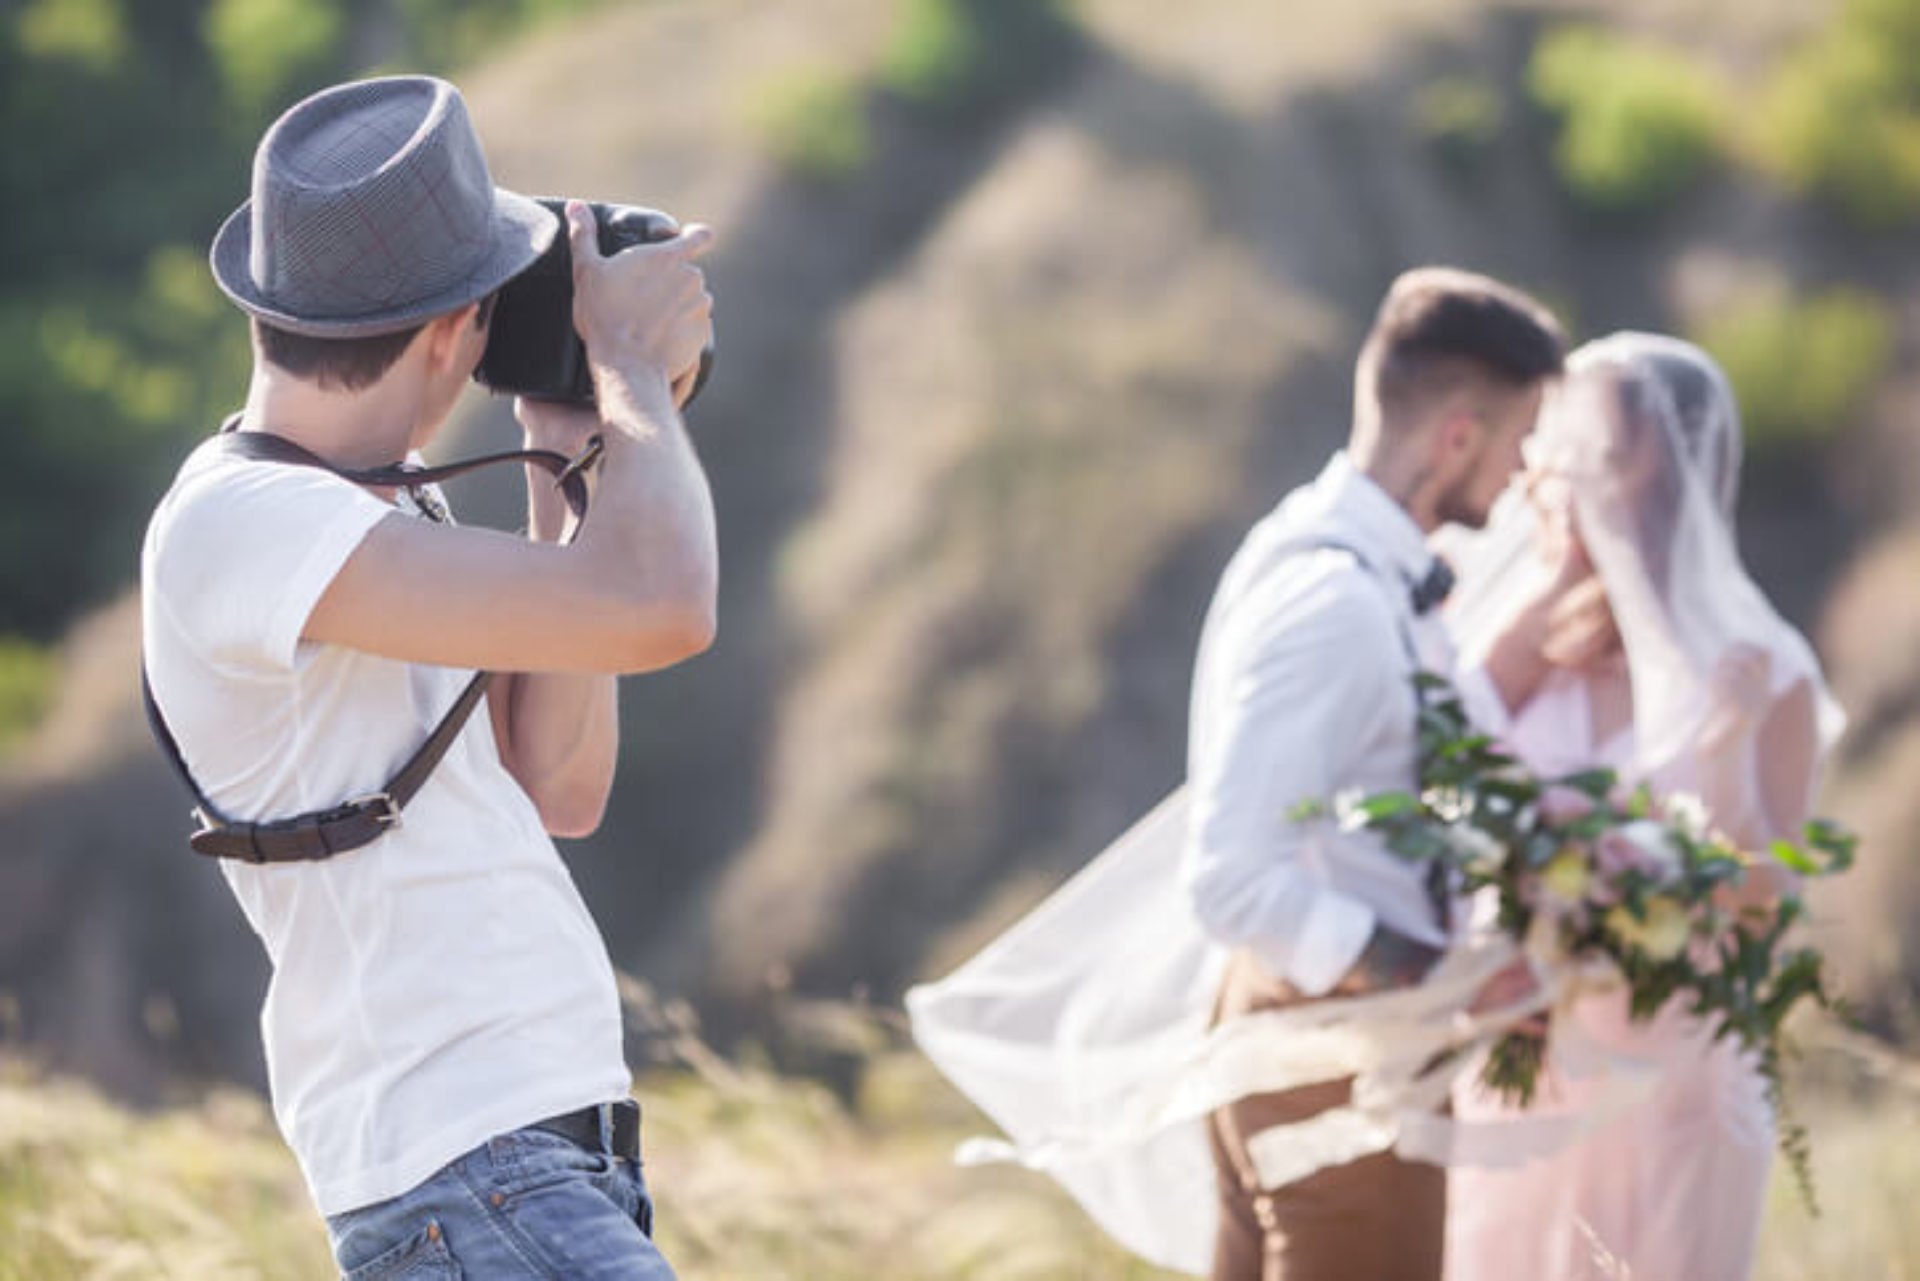 Ready to hire a Wedding Photographer?